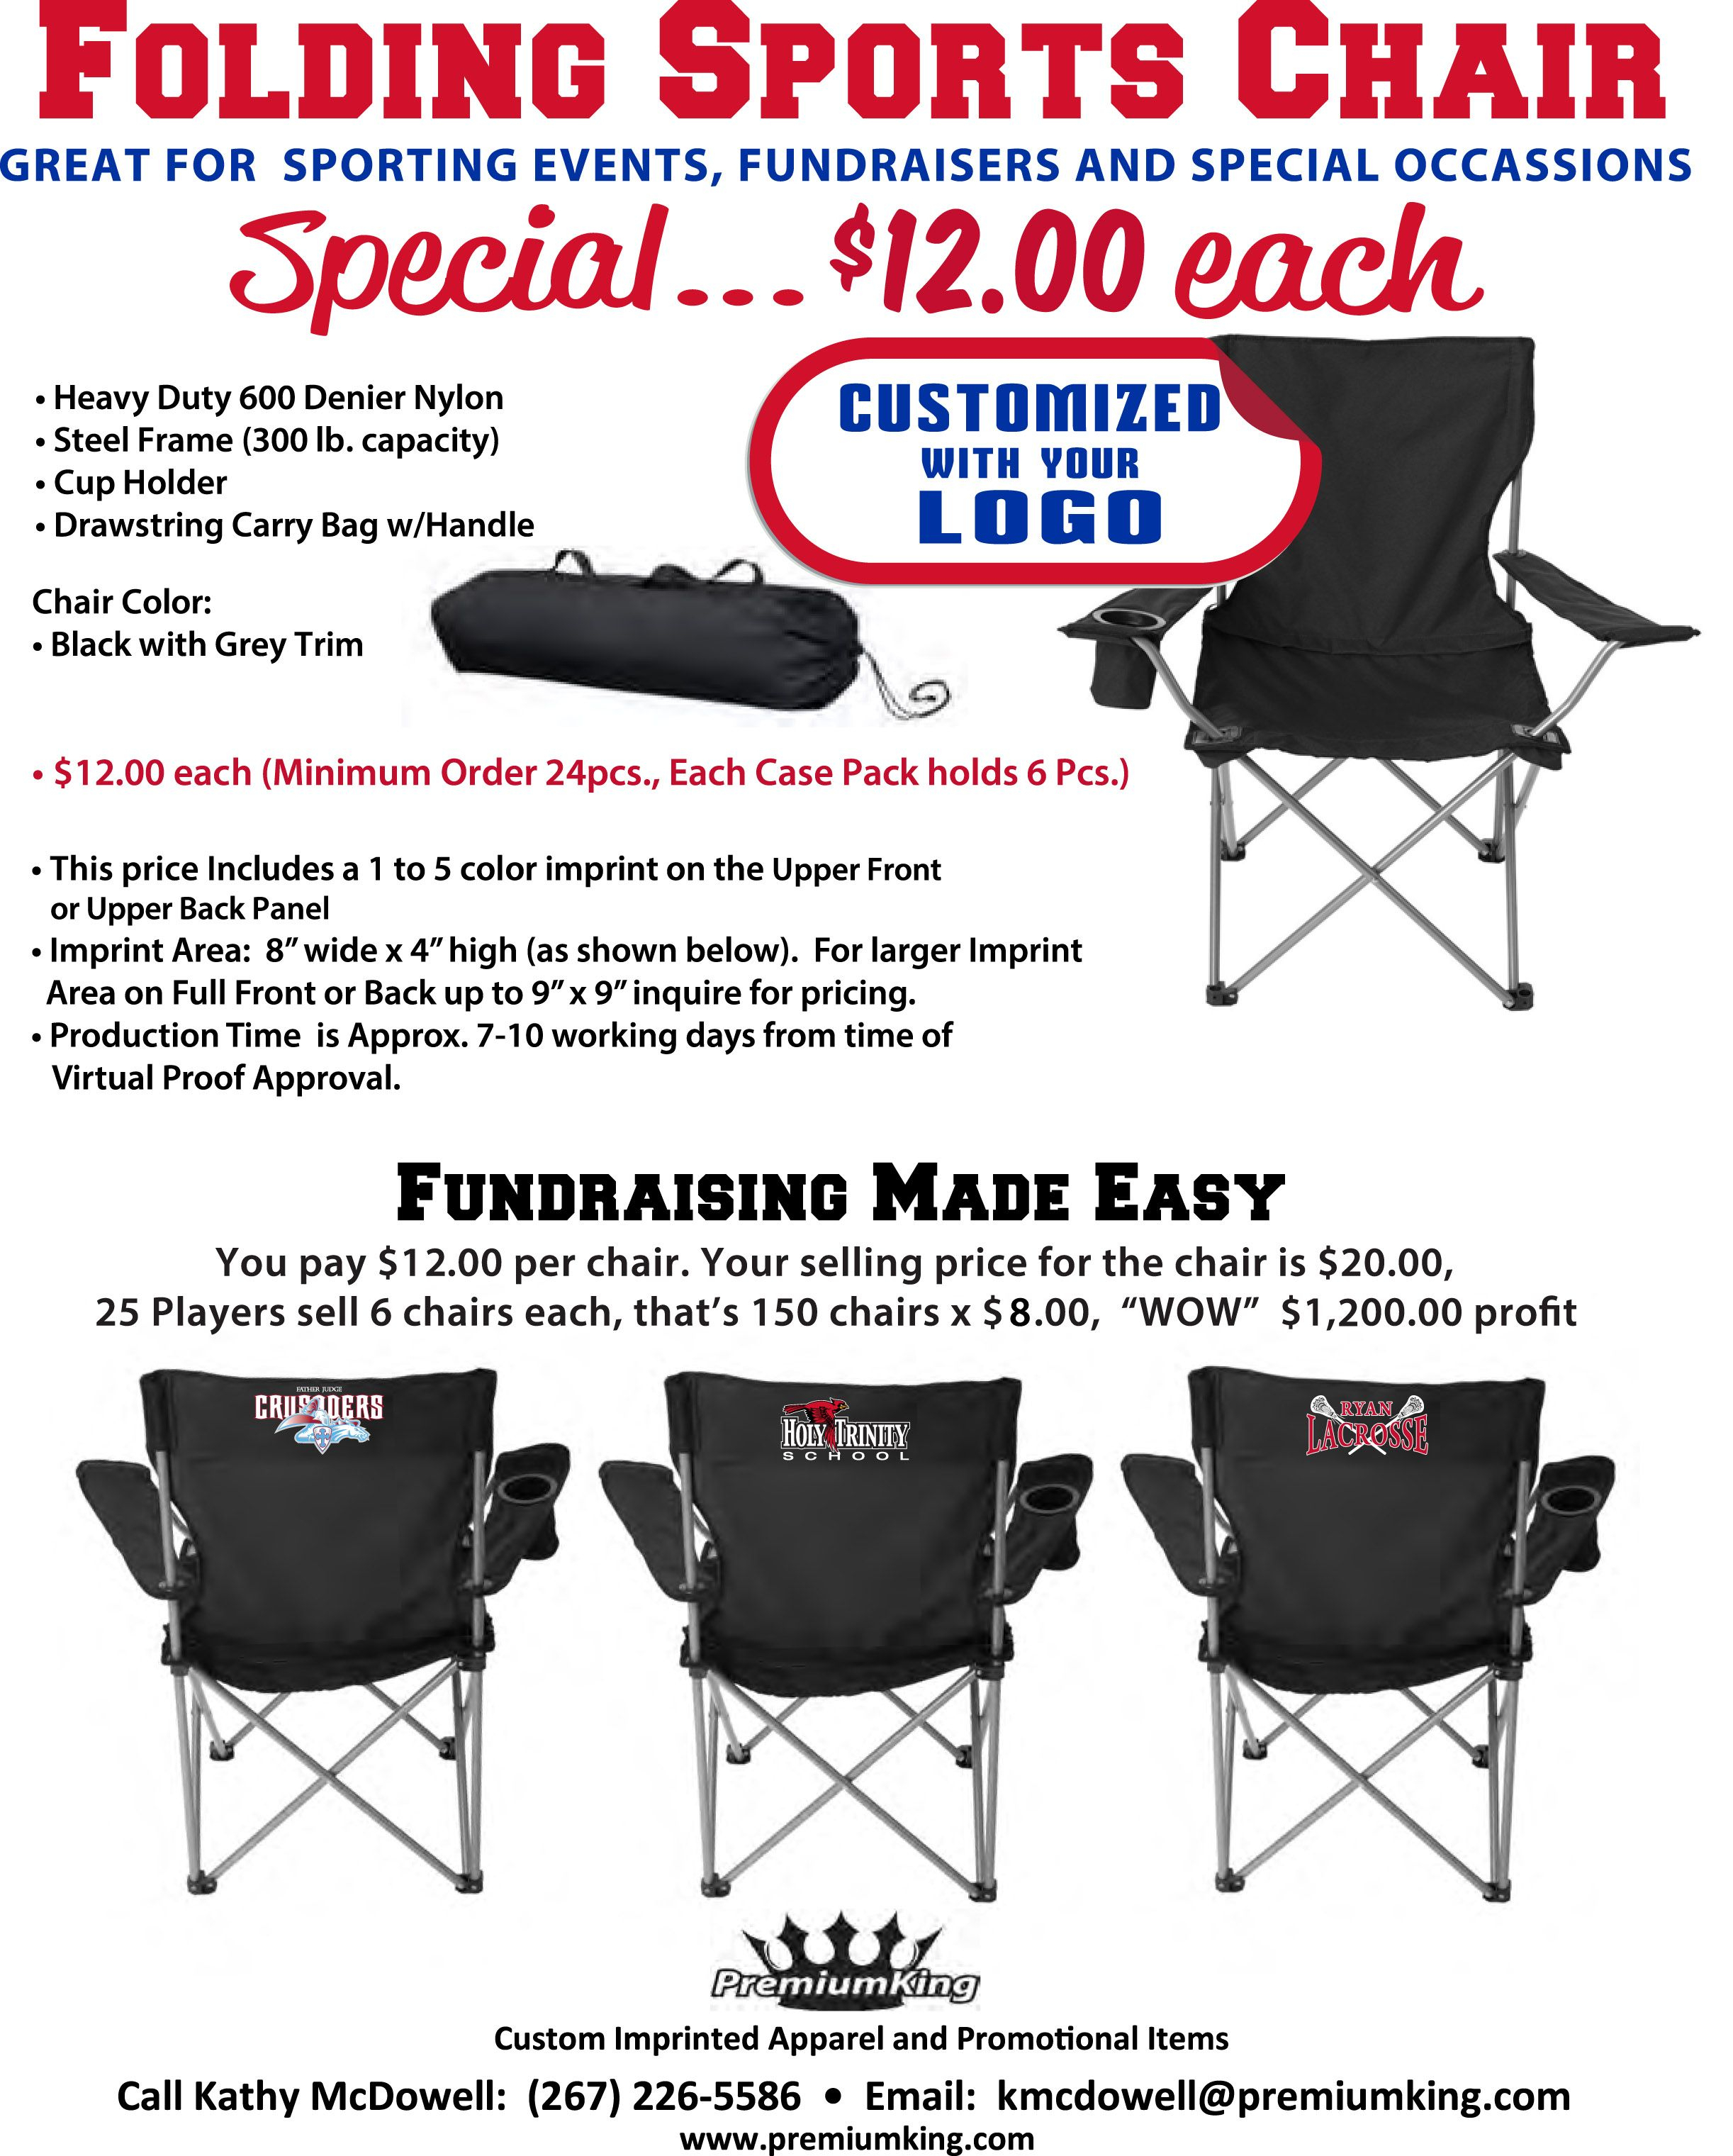 10 Beautiful Best Fundraising Ideas For Youth Sports Teams fundraiser idea folding sports chairs with team logo fundraising 5 2024